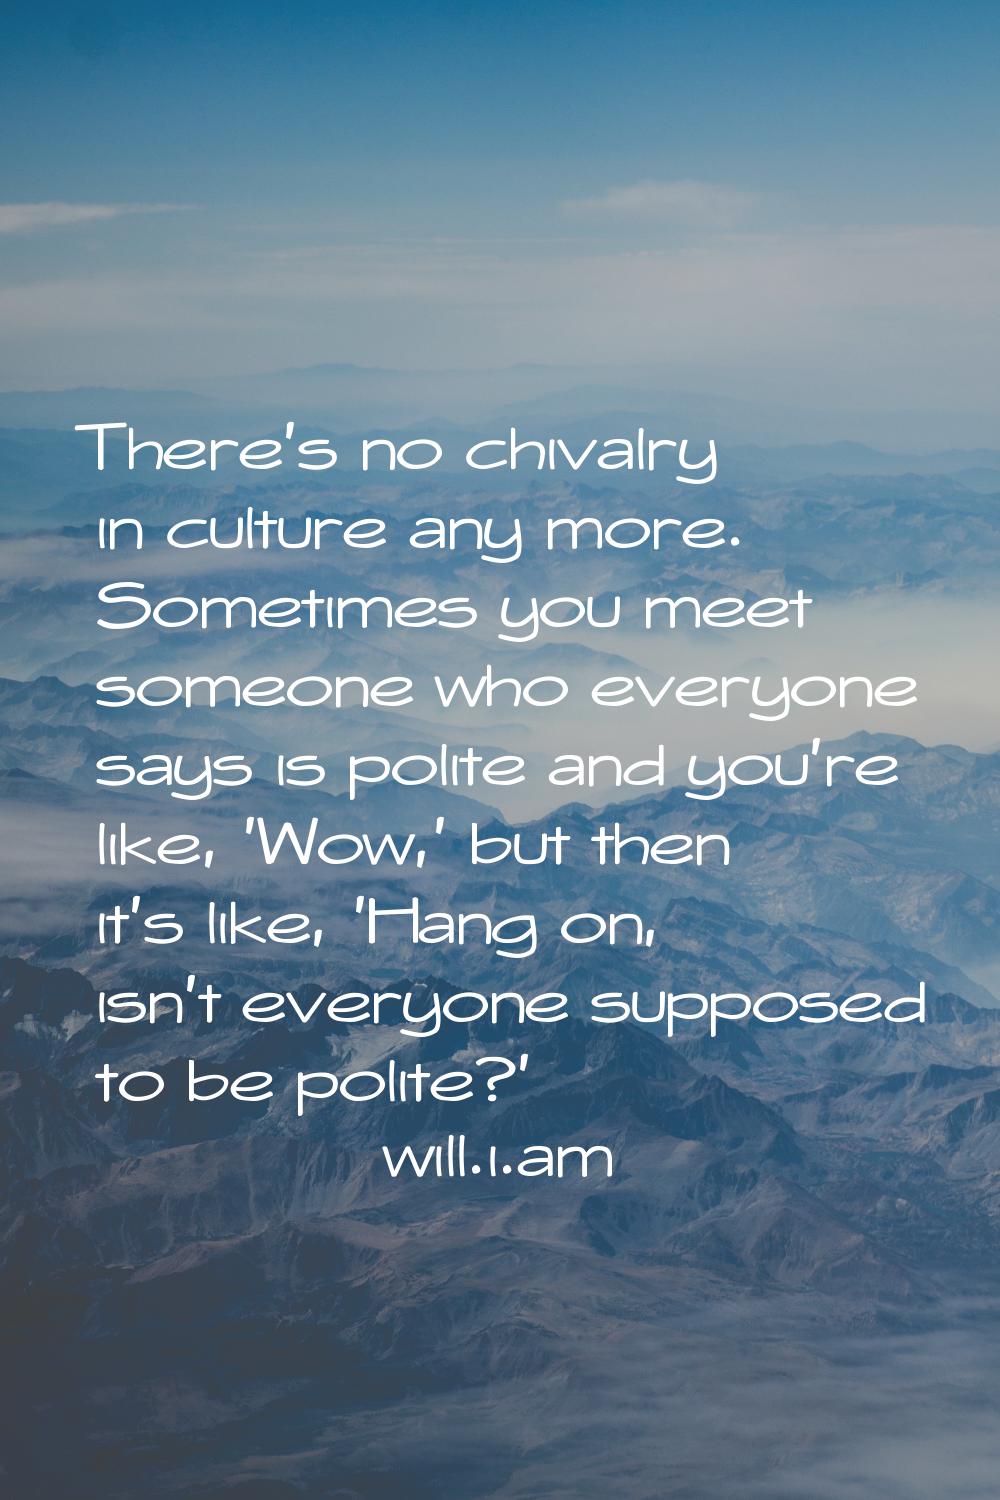 There's no chivalry in culture any more. Sometimes you meet someone who everyone says is polite and